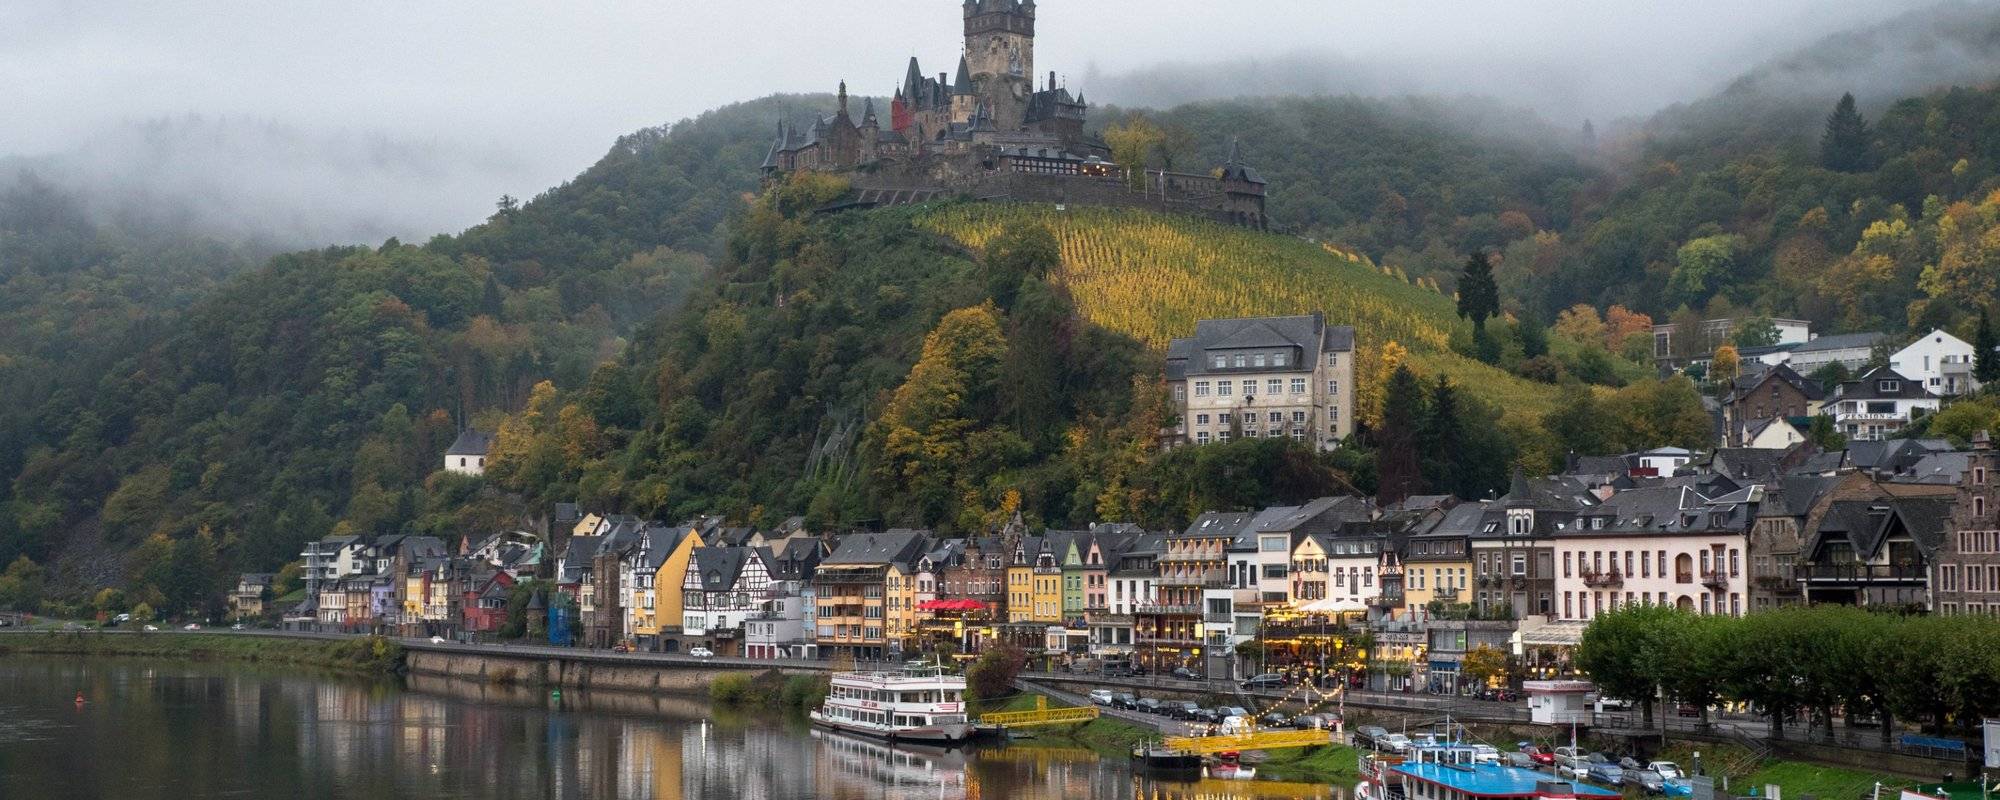 Medieval jewel of the Moselle valley